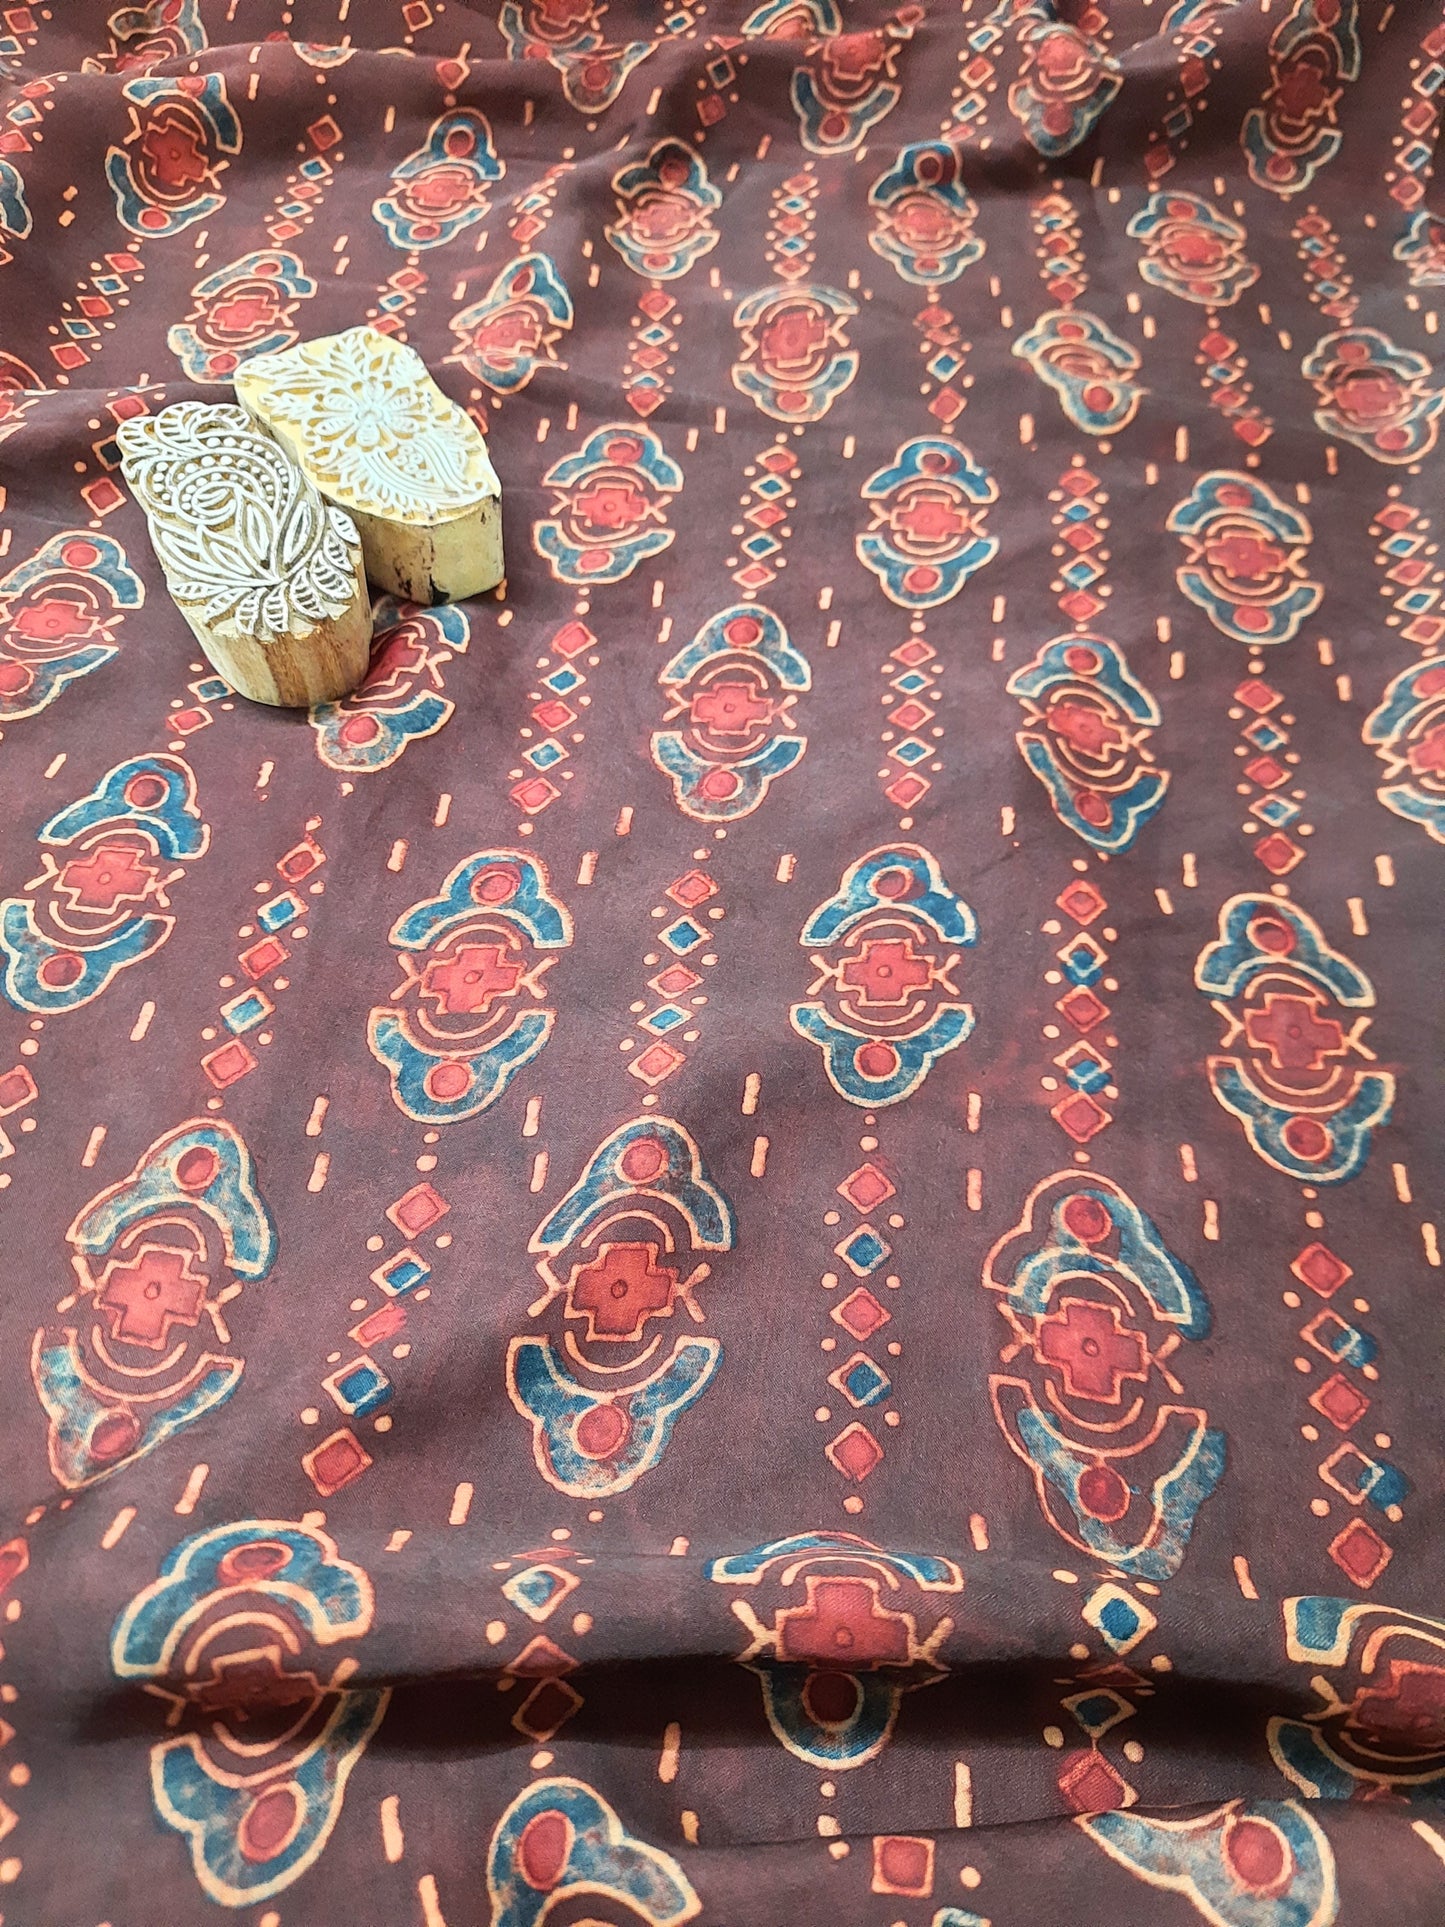 Transform your wardrobe with our luxurious Modal Silk - Rusty Maroon Ajrakh Hand Block Print Fabric. Experience the softness and flow of modal silk while embracing the beauty of artisan handmade ajrakh block prints. Elevate your style with this sustainable, exclusive fabric.